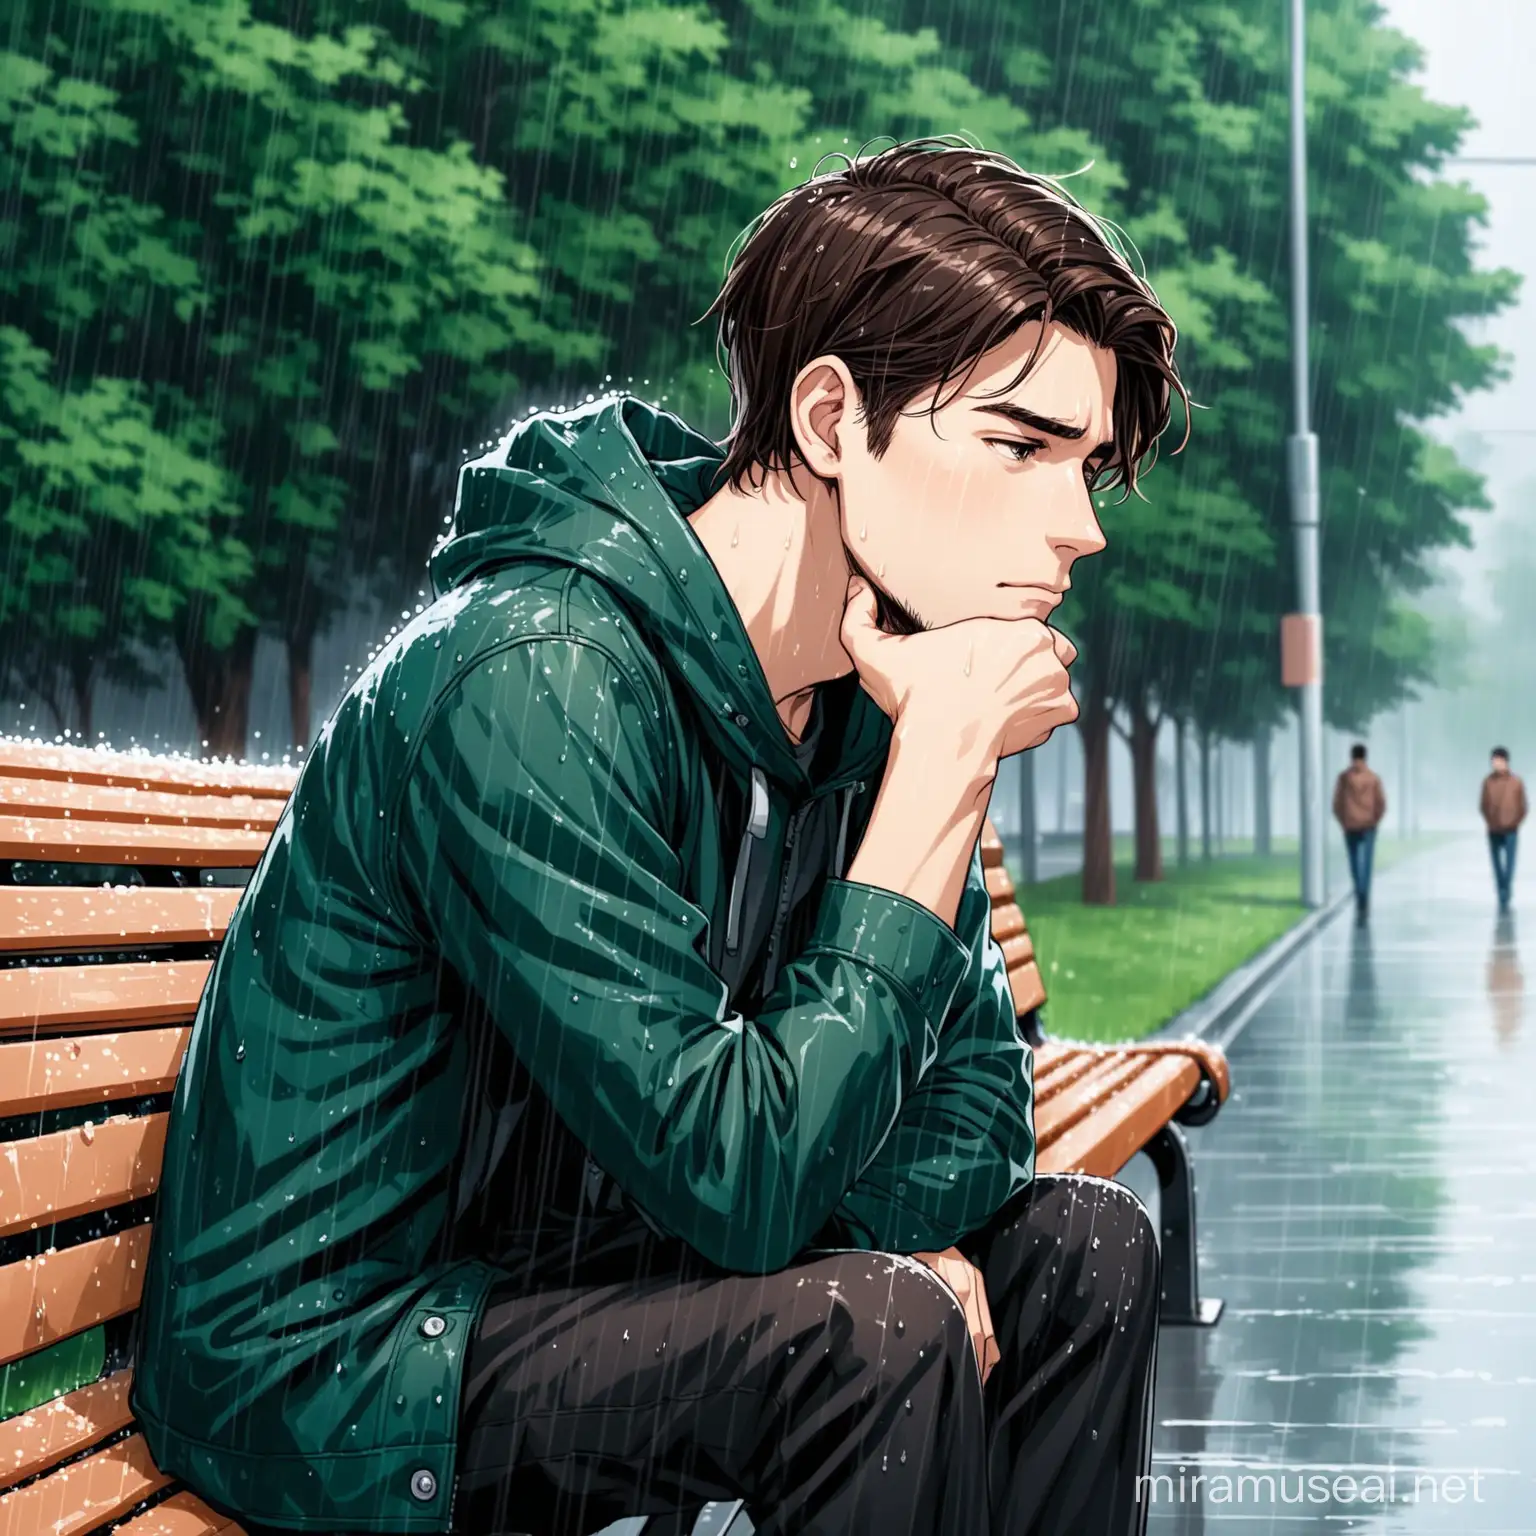 Lonely Young Man Sitting on Bench in Rainy Weather